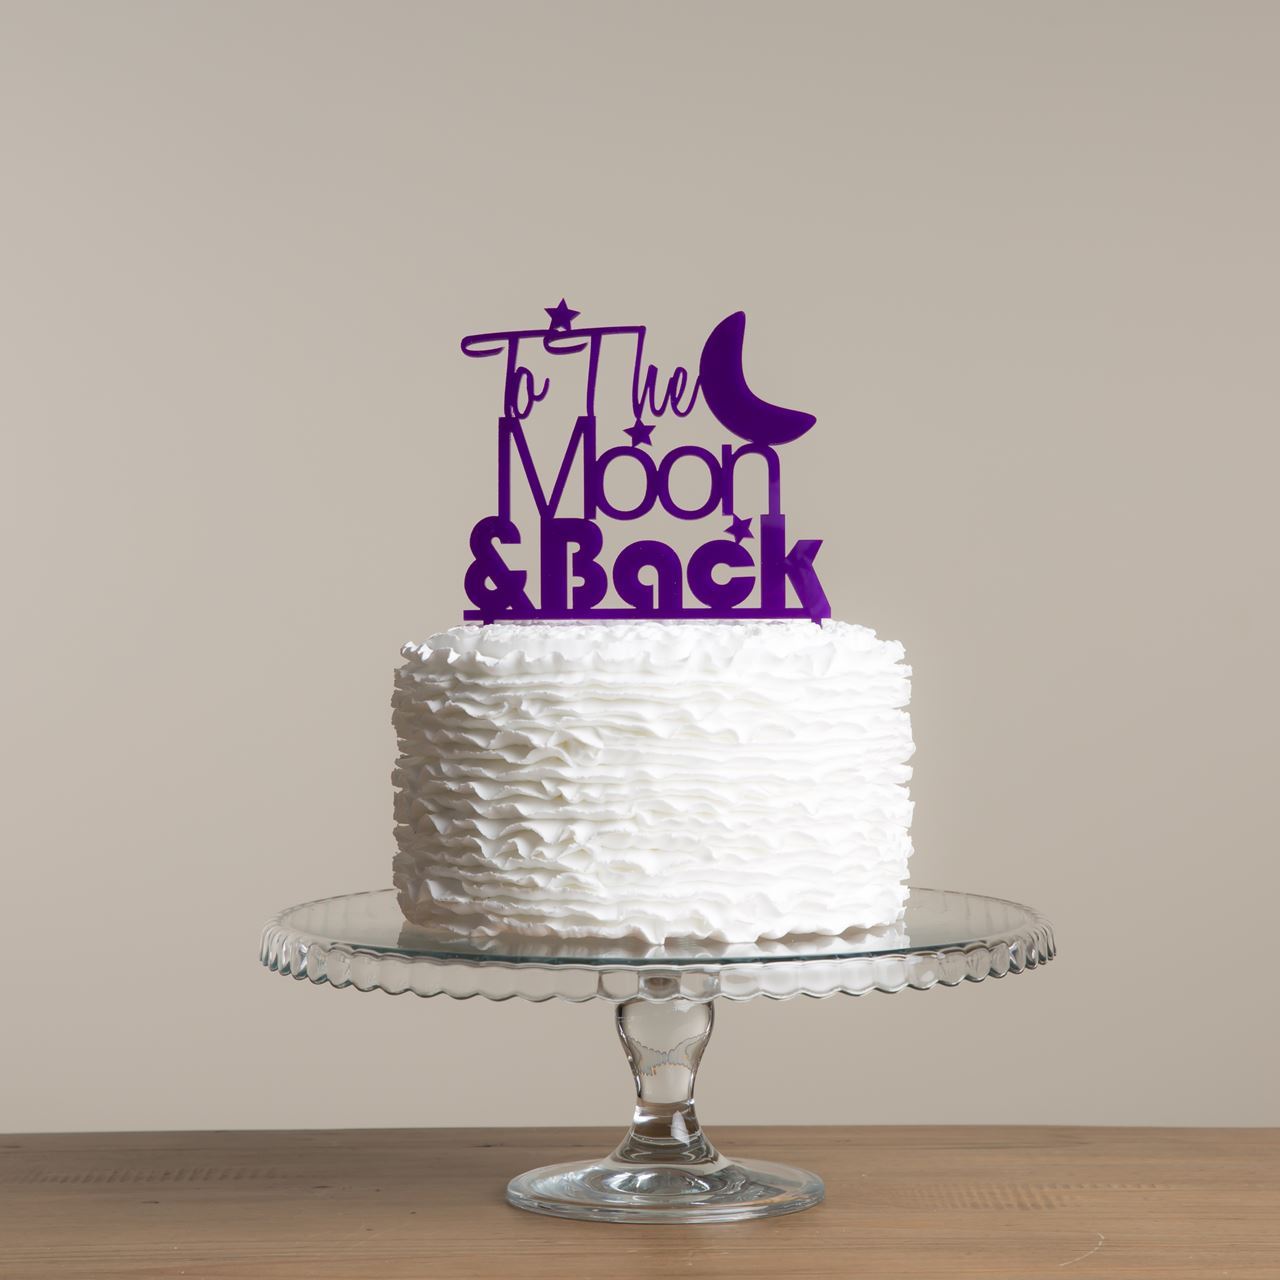 To The Moon And Back Cake Topper